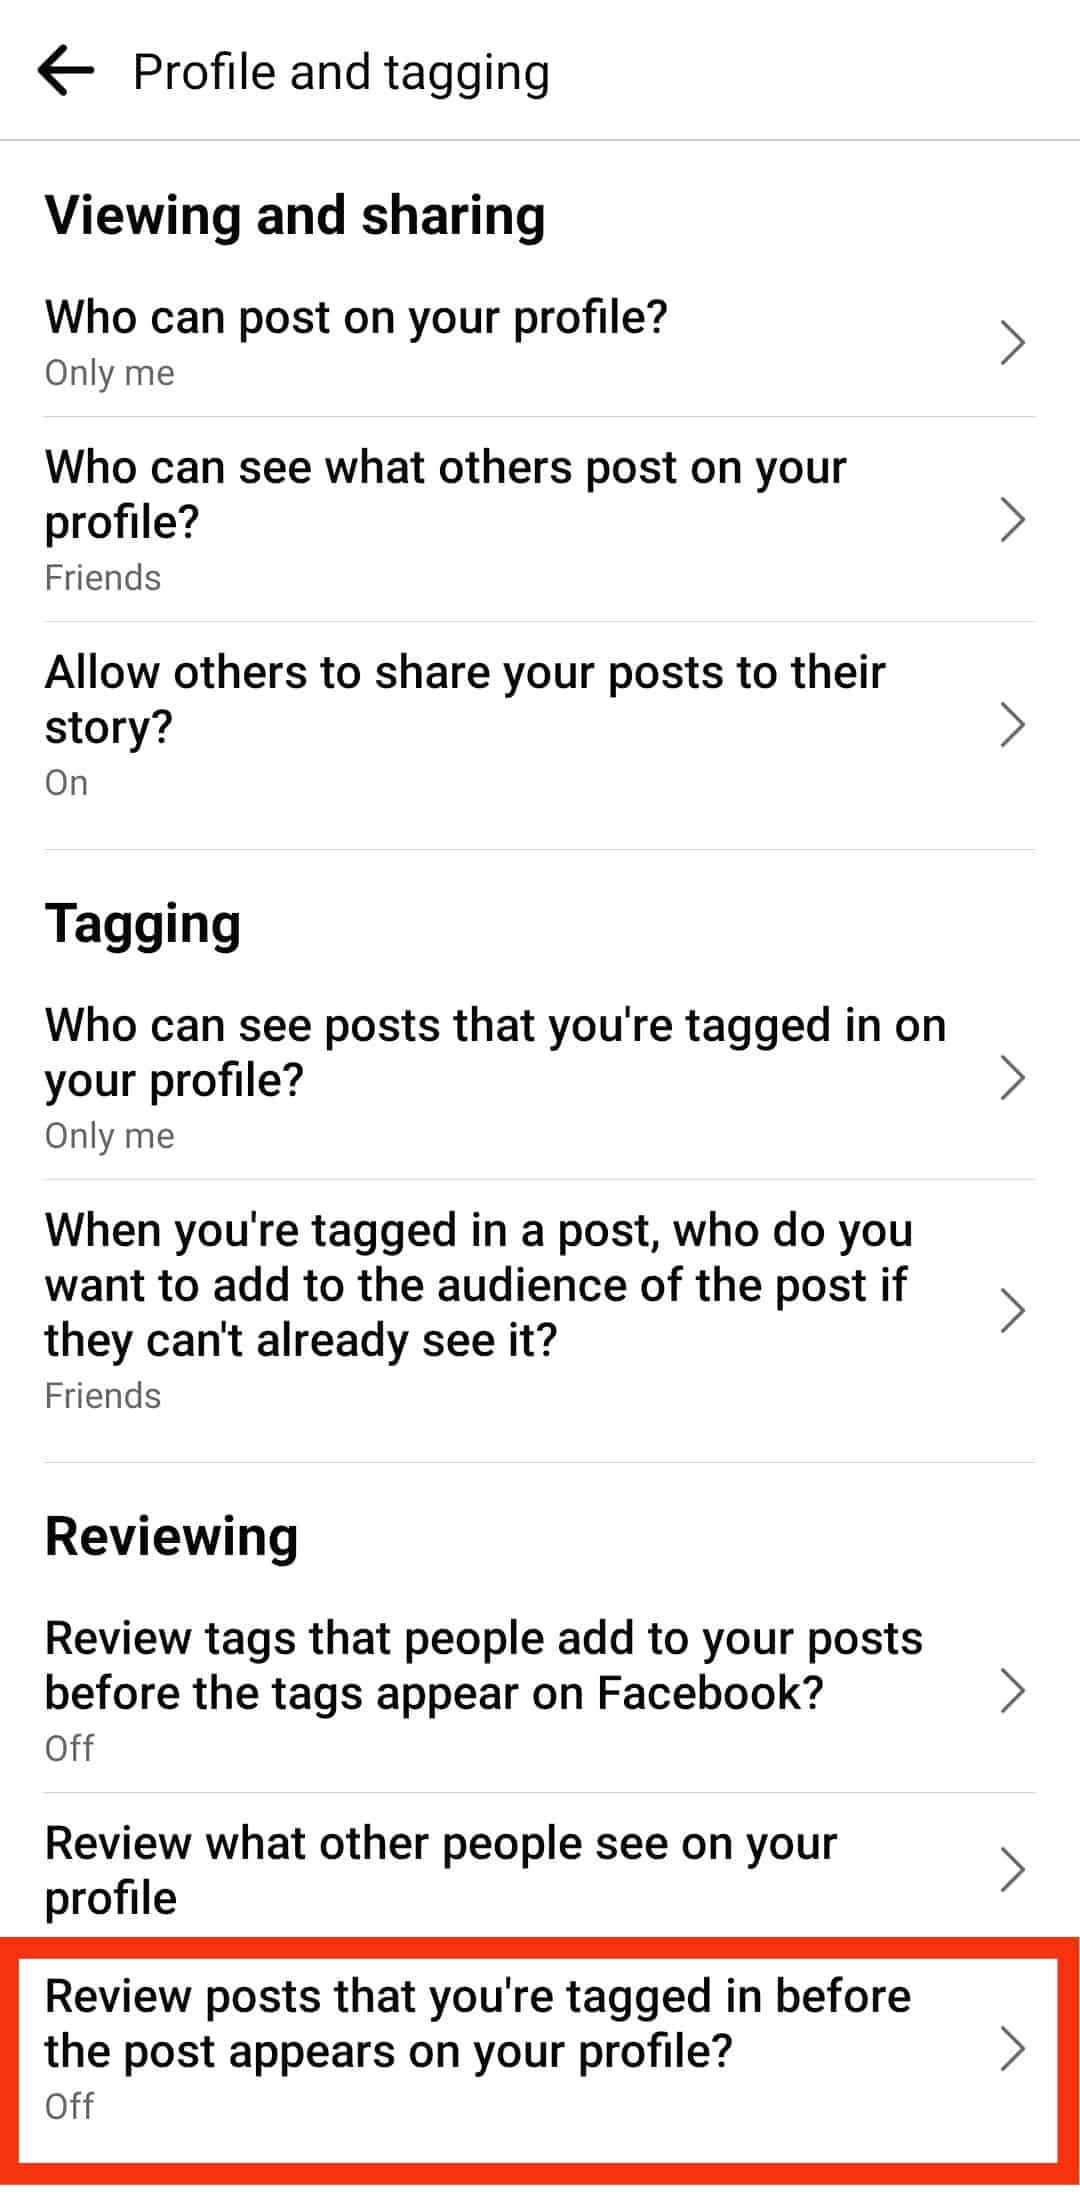 Tap On Review Posts That You're Tagged In Before The Post Appears On Your Profile